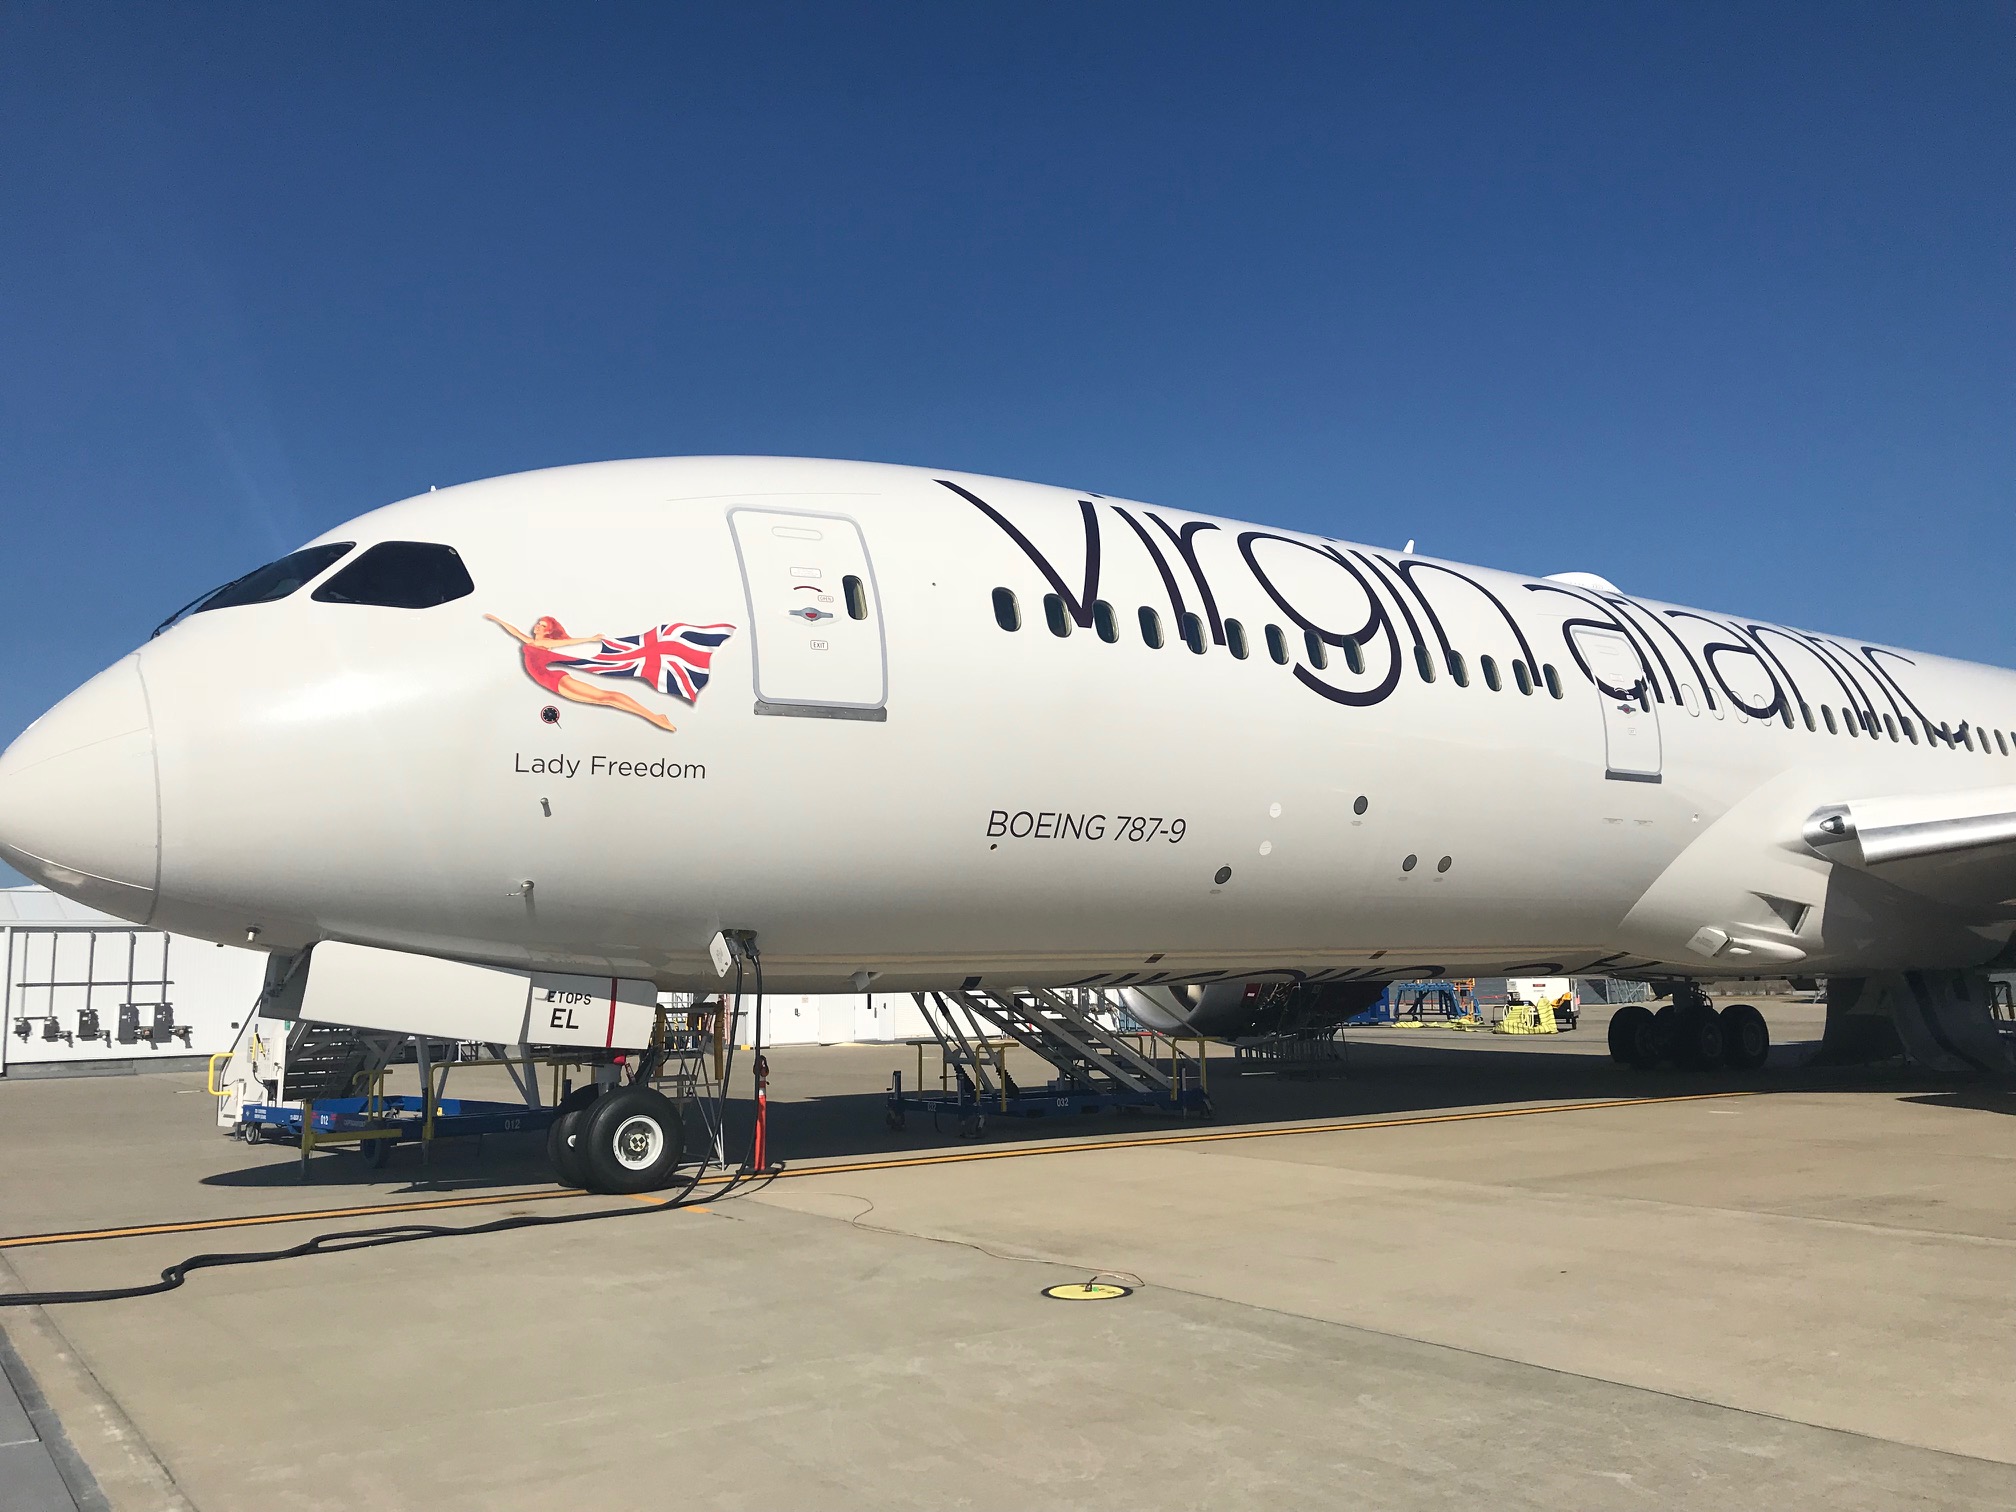 Virgin Atlantic launches second daily service between London Heathrow and Johannesburg